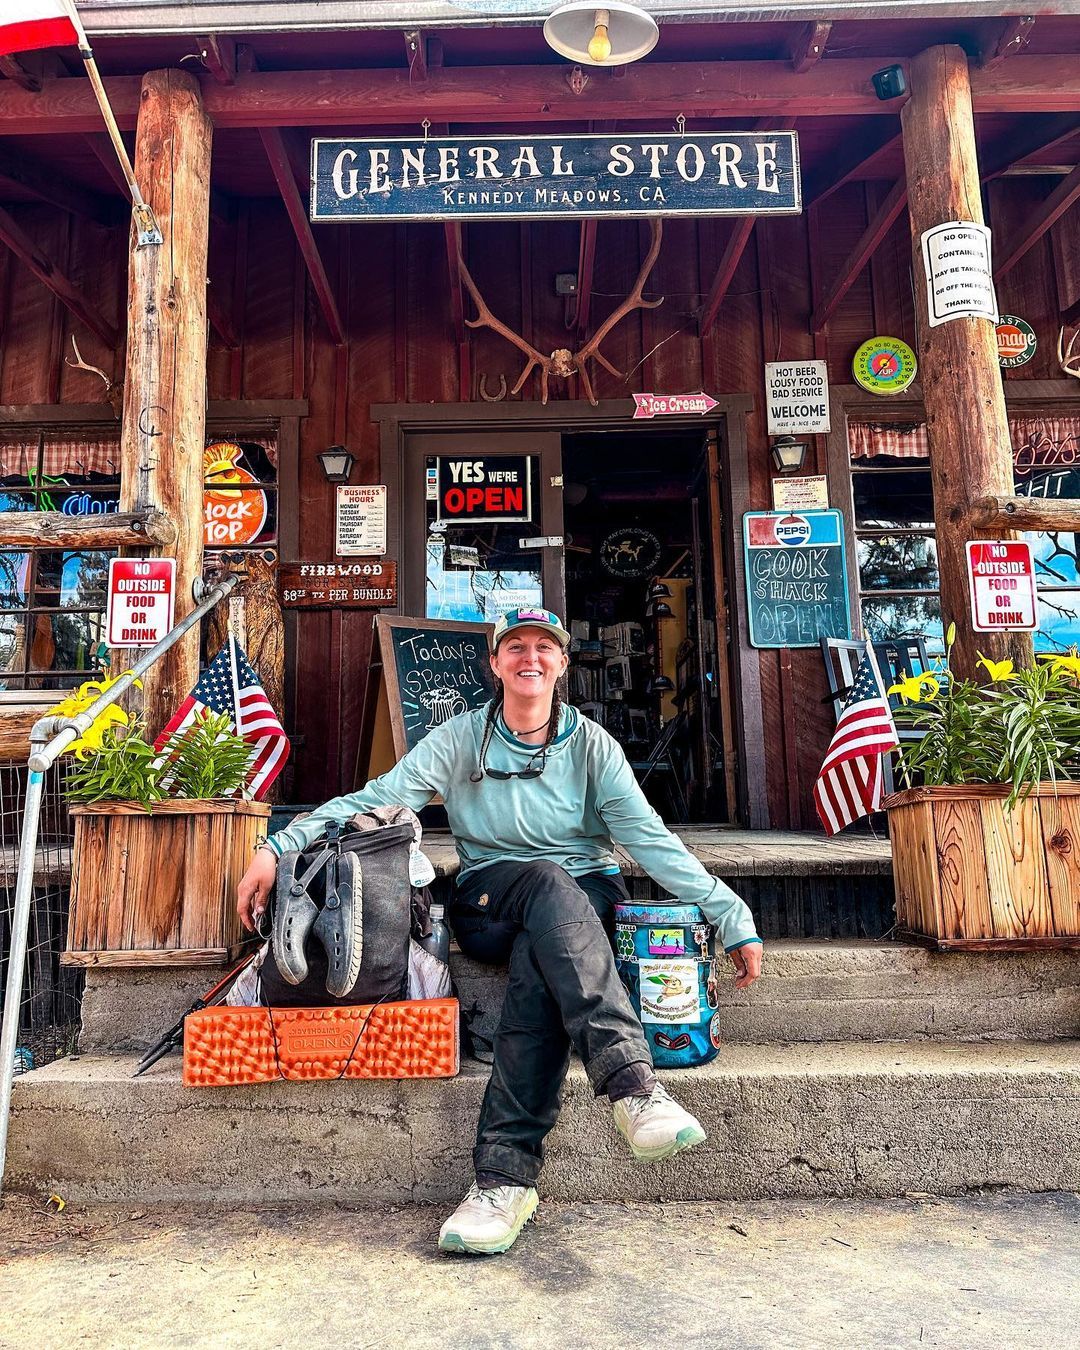 A PCT hiker taking a rest in front of the Kennedy Meadows General Store.